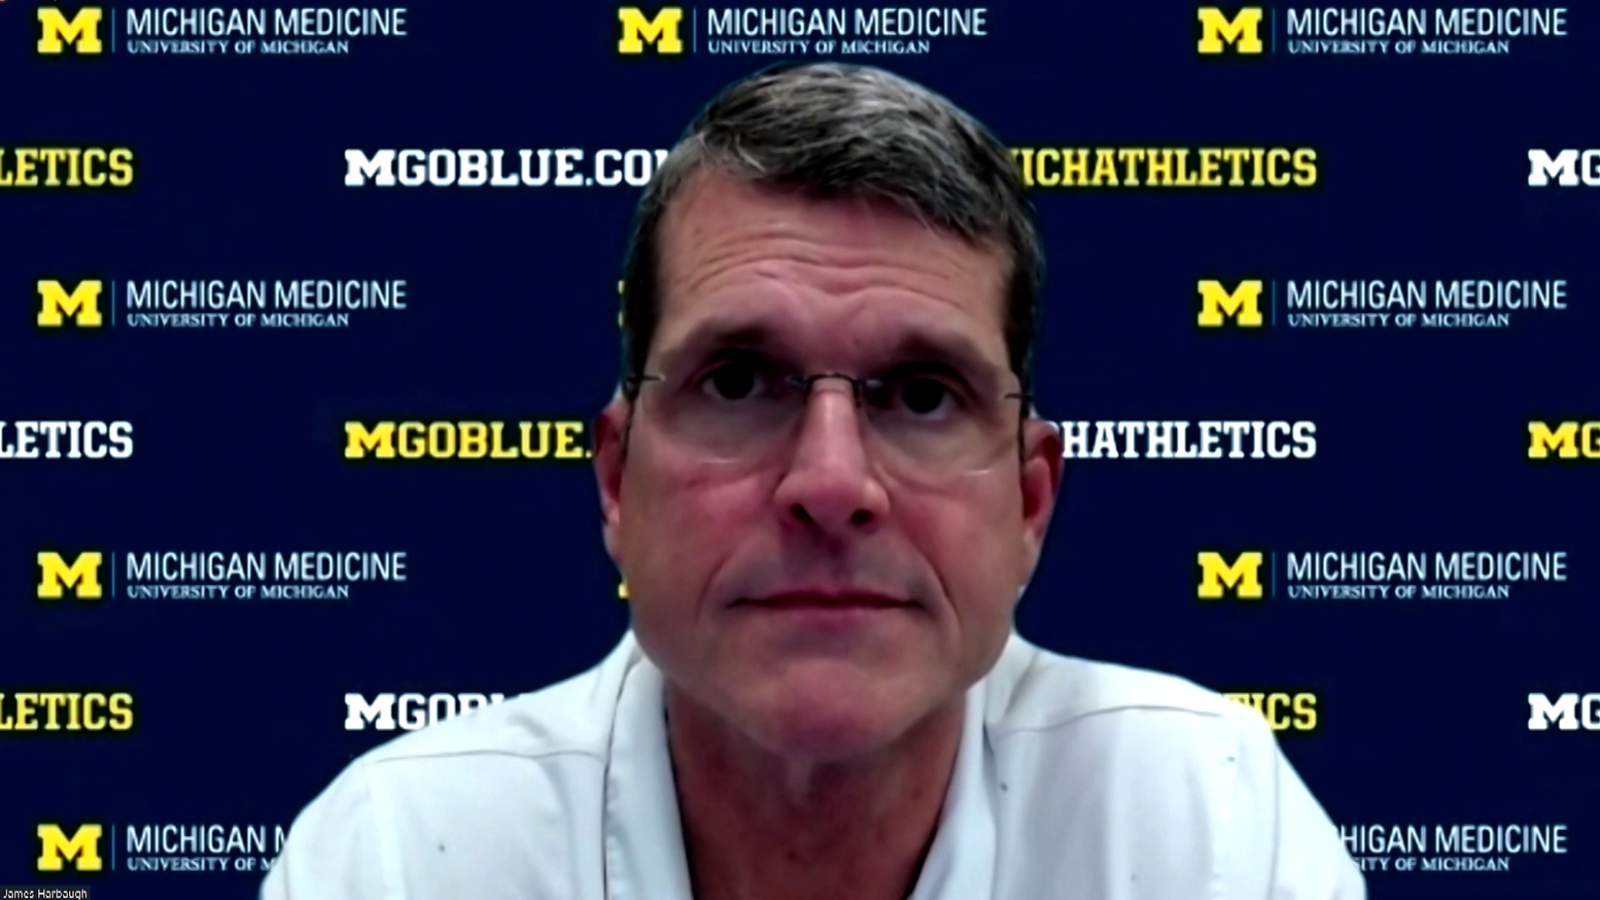 Michigan football injury update: Jim Harbaugh expects Daxton Hill, Quinn Nordin back at practice